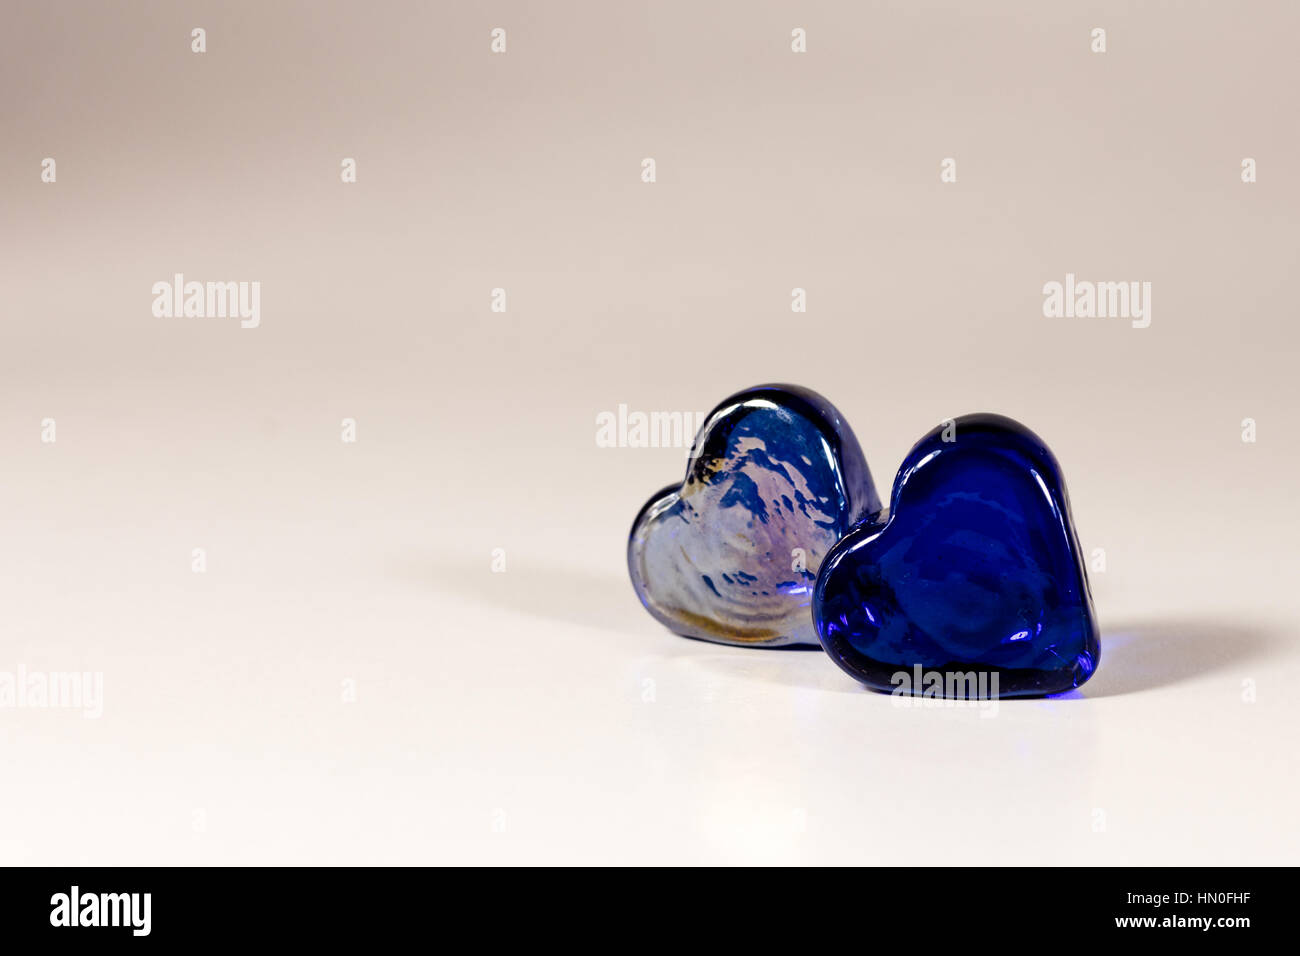 Two blue glass hearts (still life) on white background Stock Photo